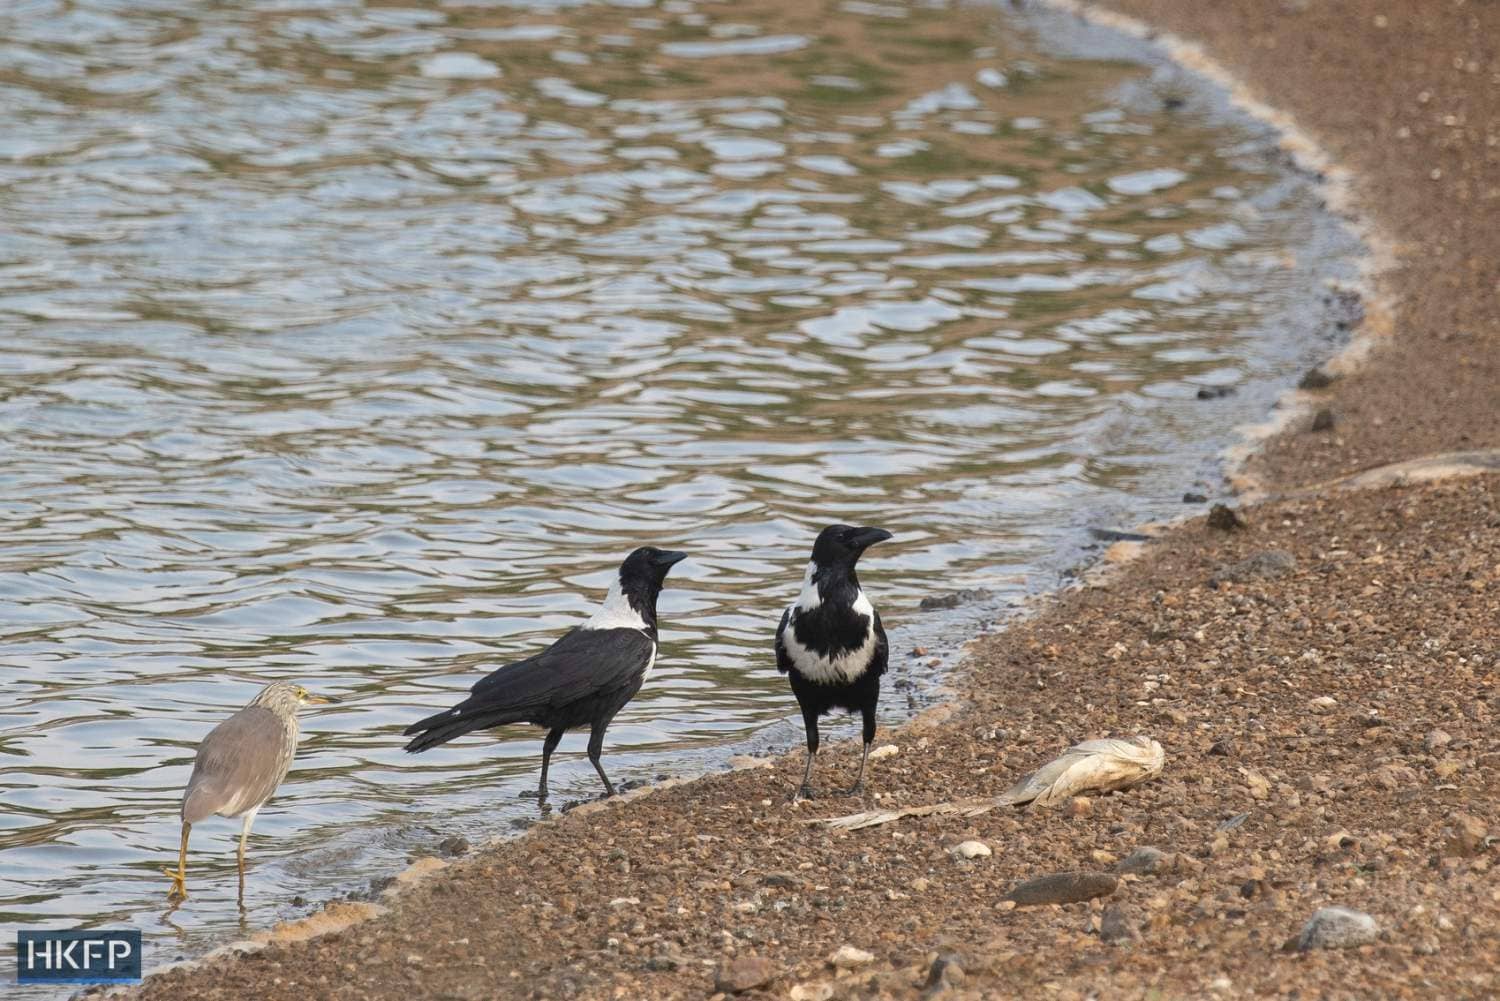 Some collared crows near a pond in San Tin. Photo: Kyle Lam/HKFP.